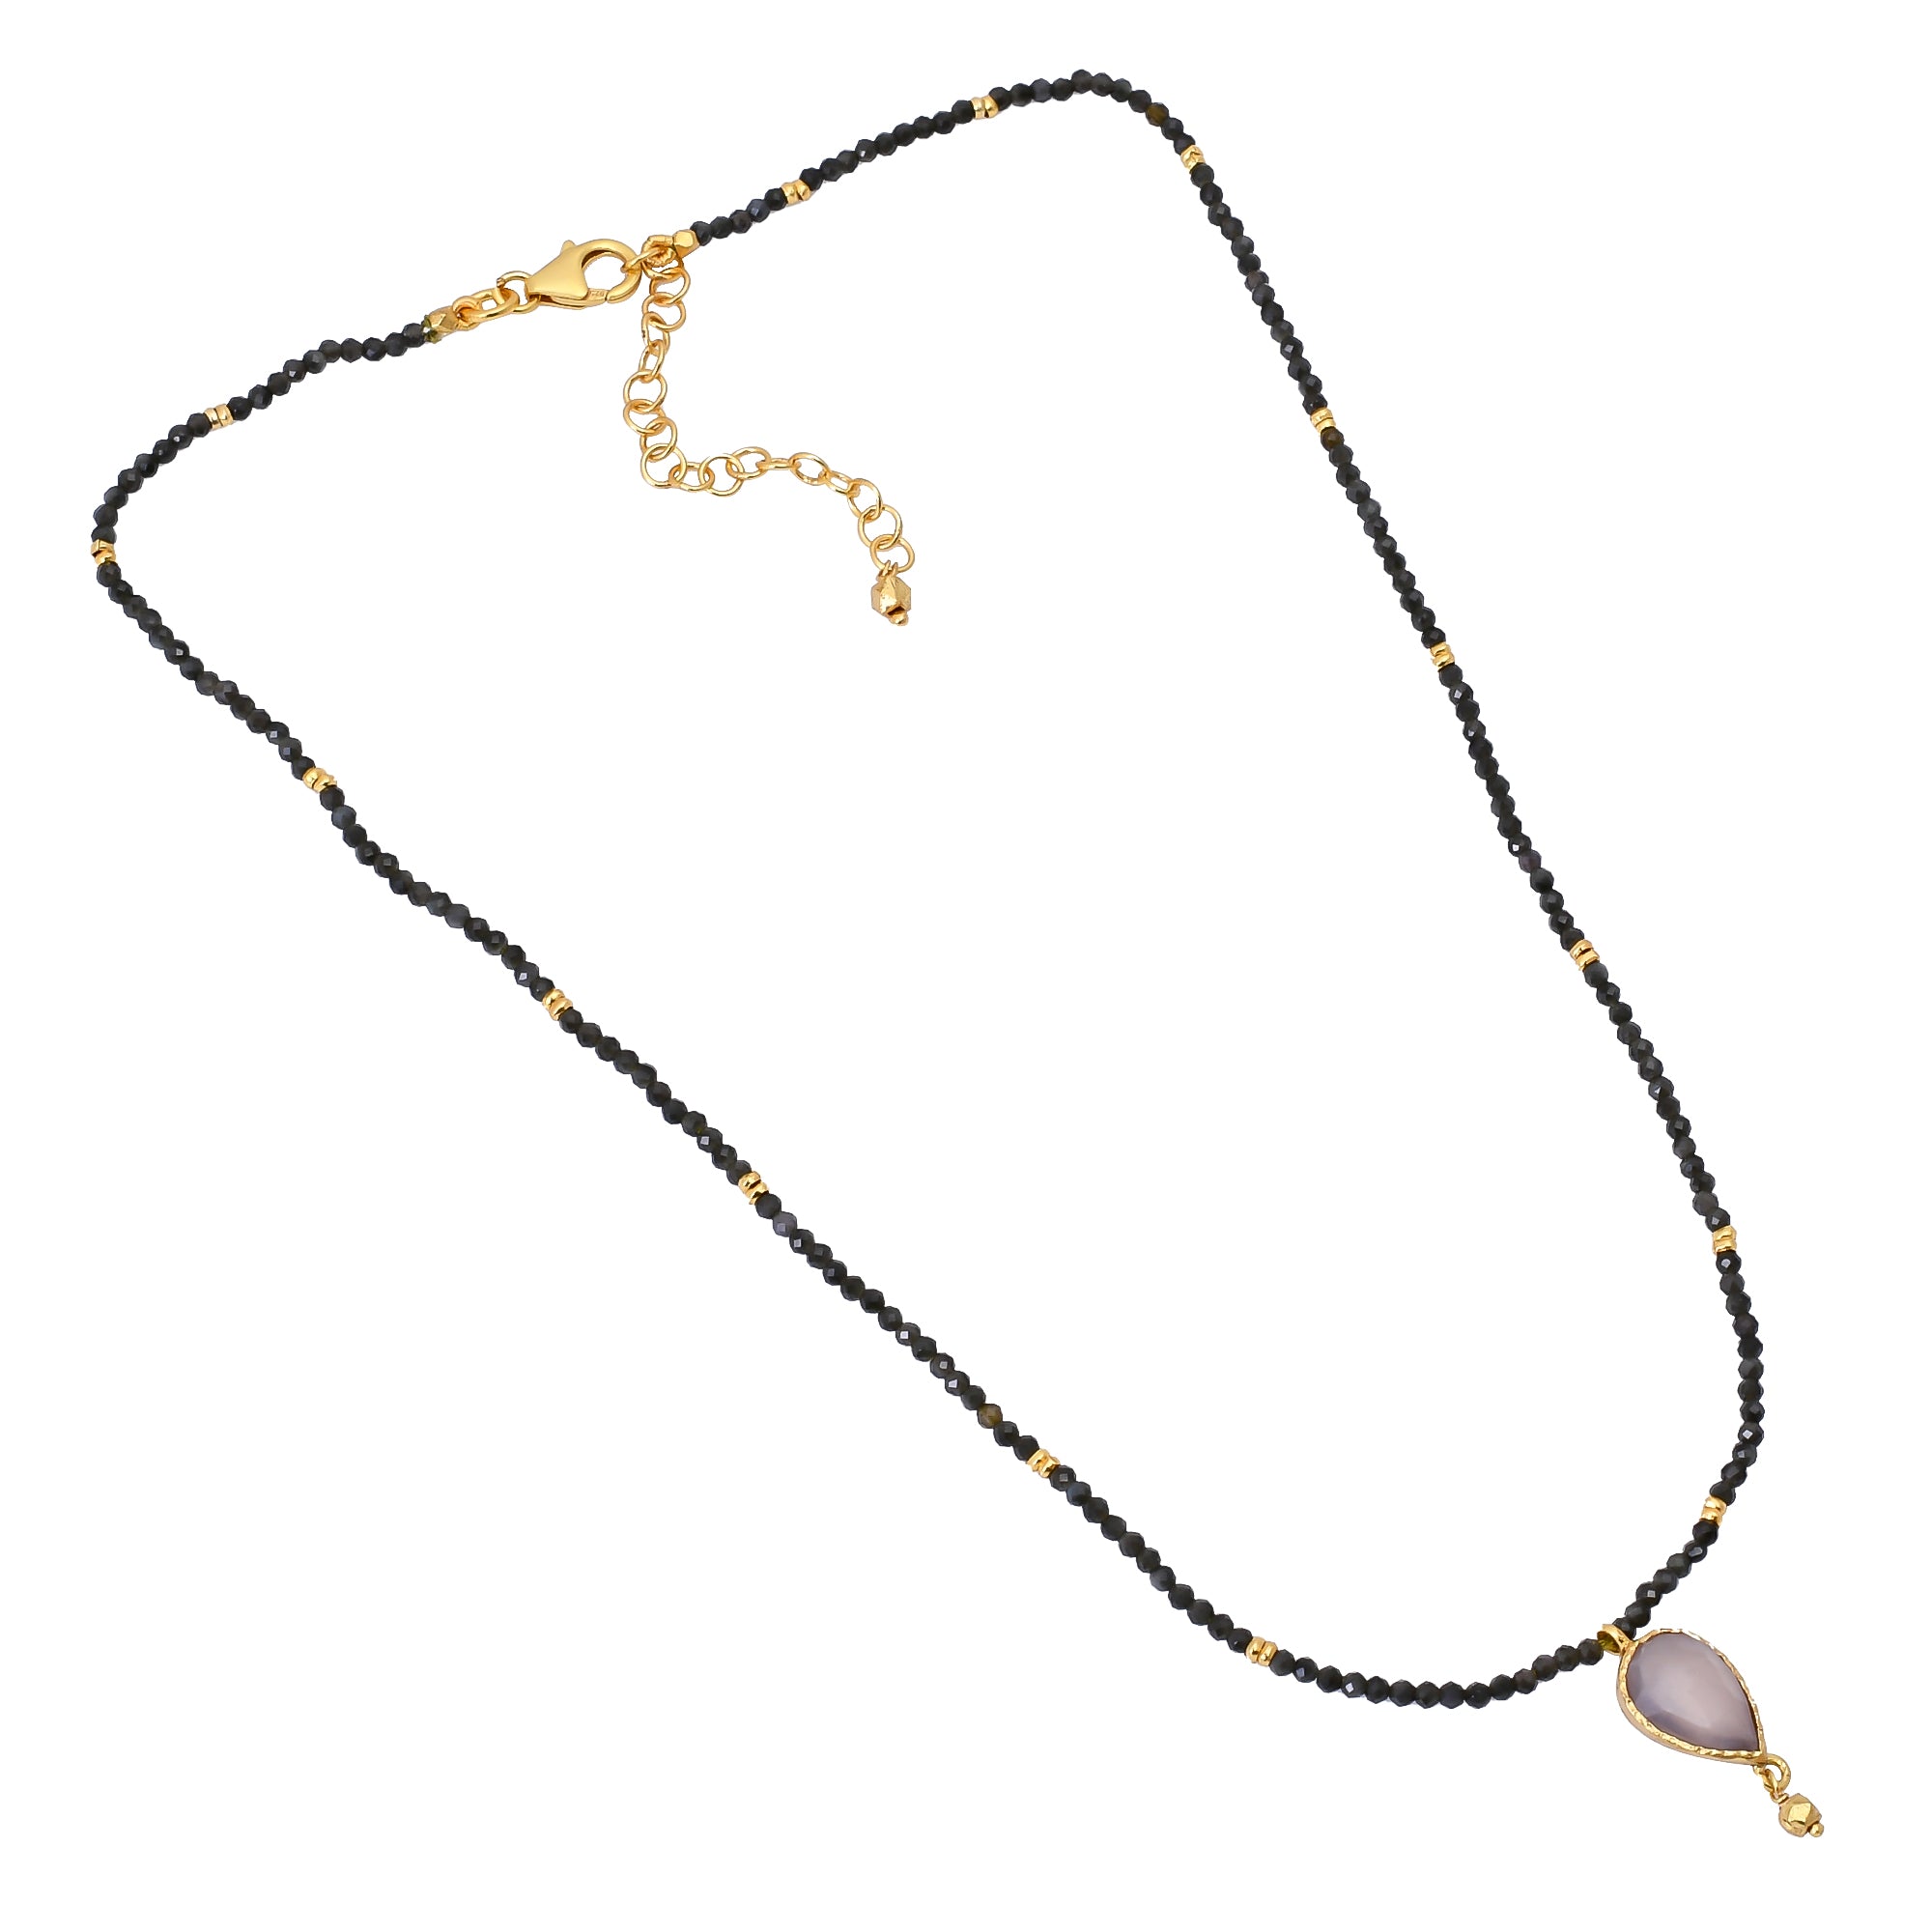 Silver Gold Plated Chalcedony Necklace